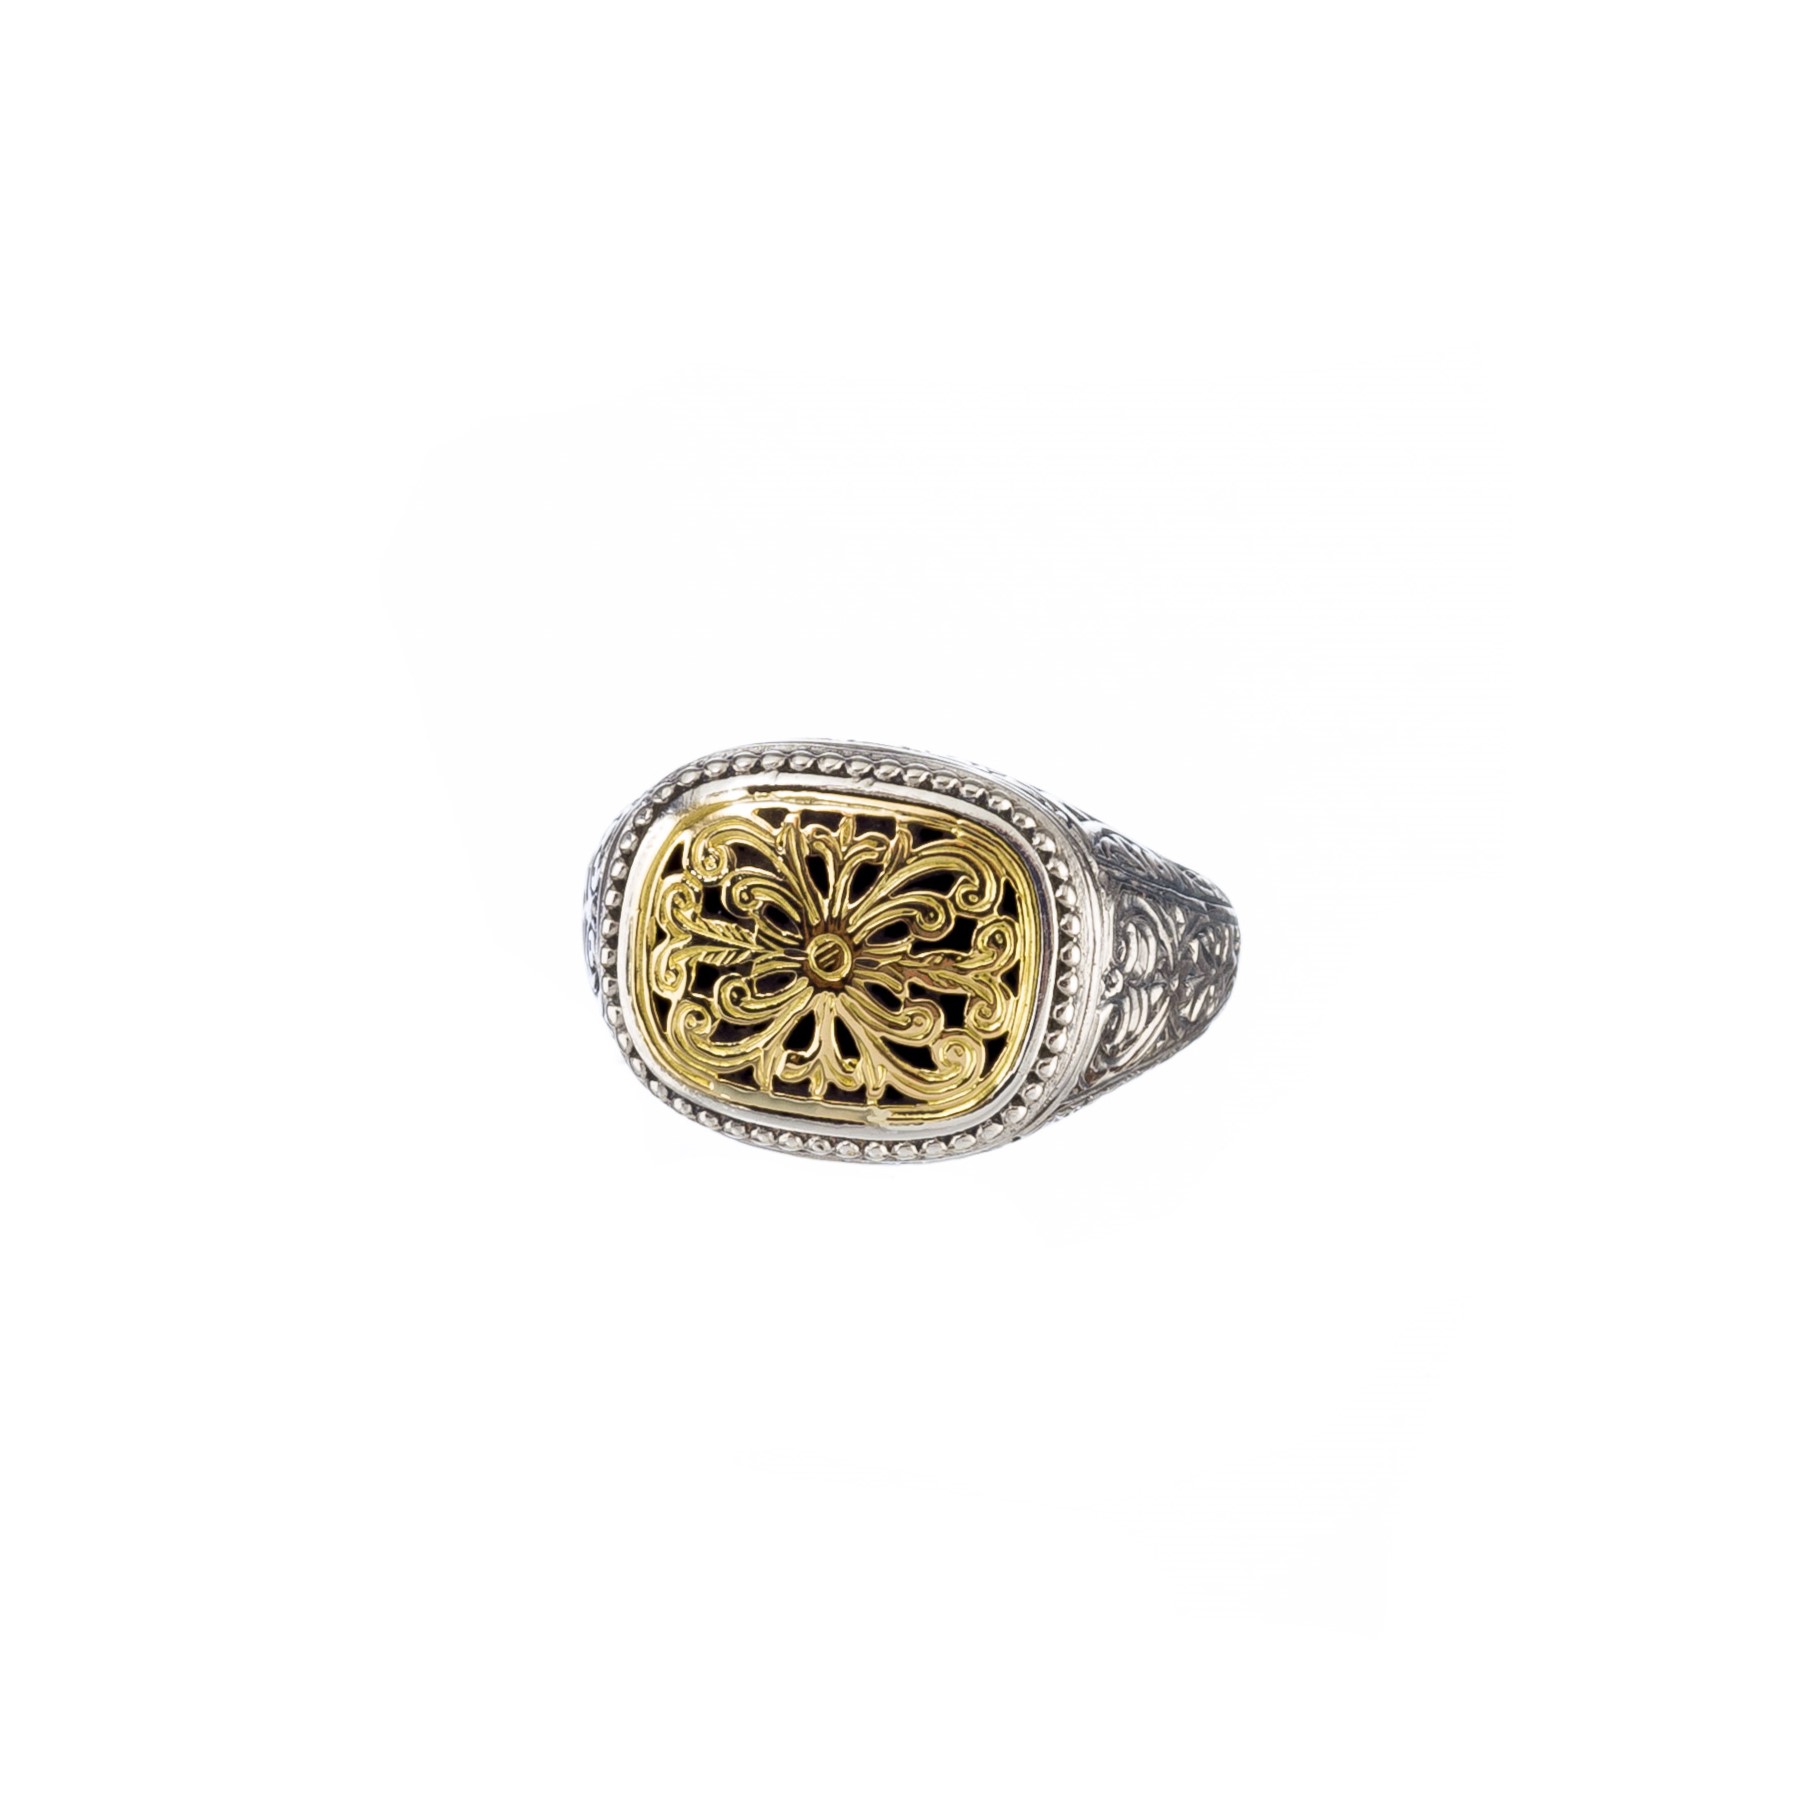 Classic byzantine ring in 18K Gold and Sterling Silver